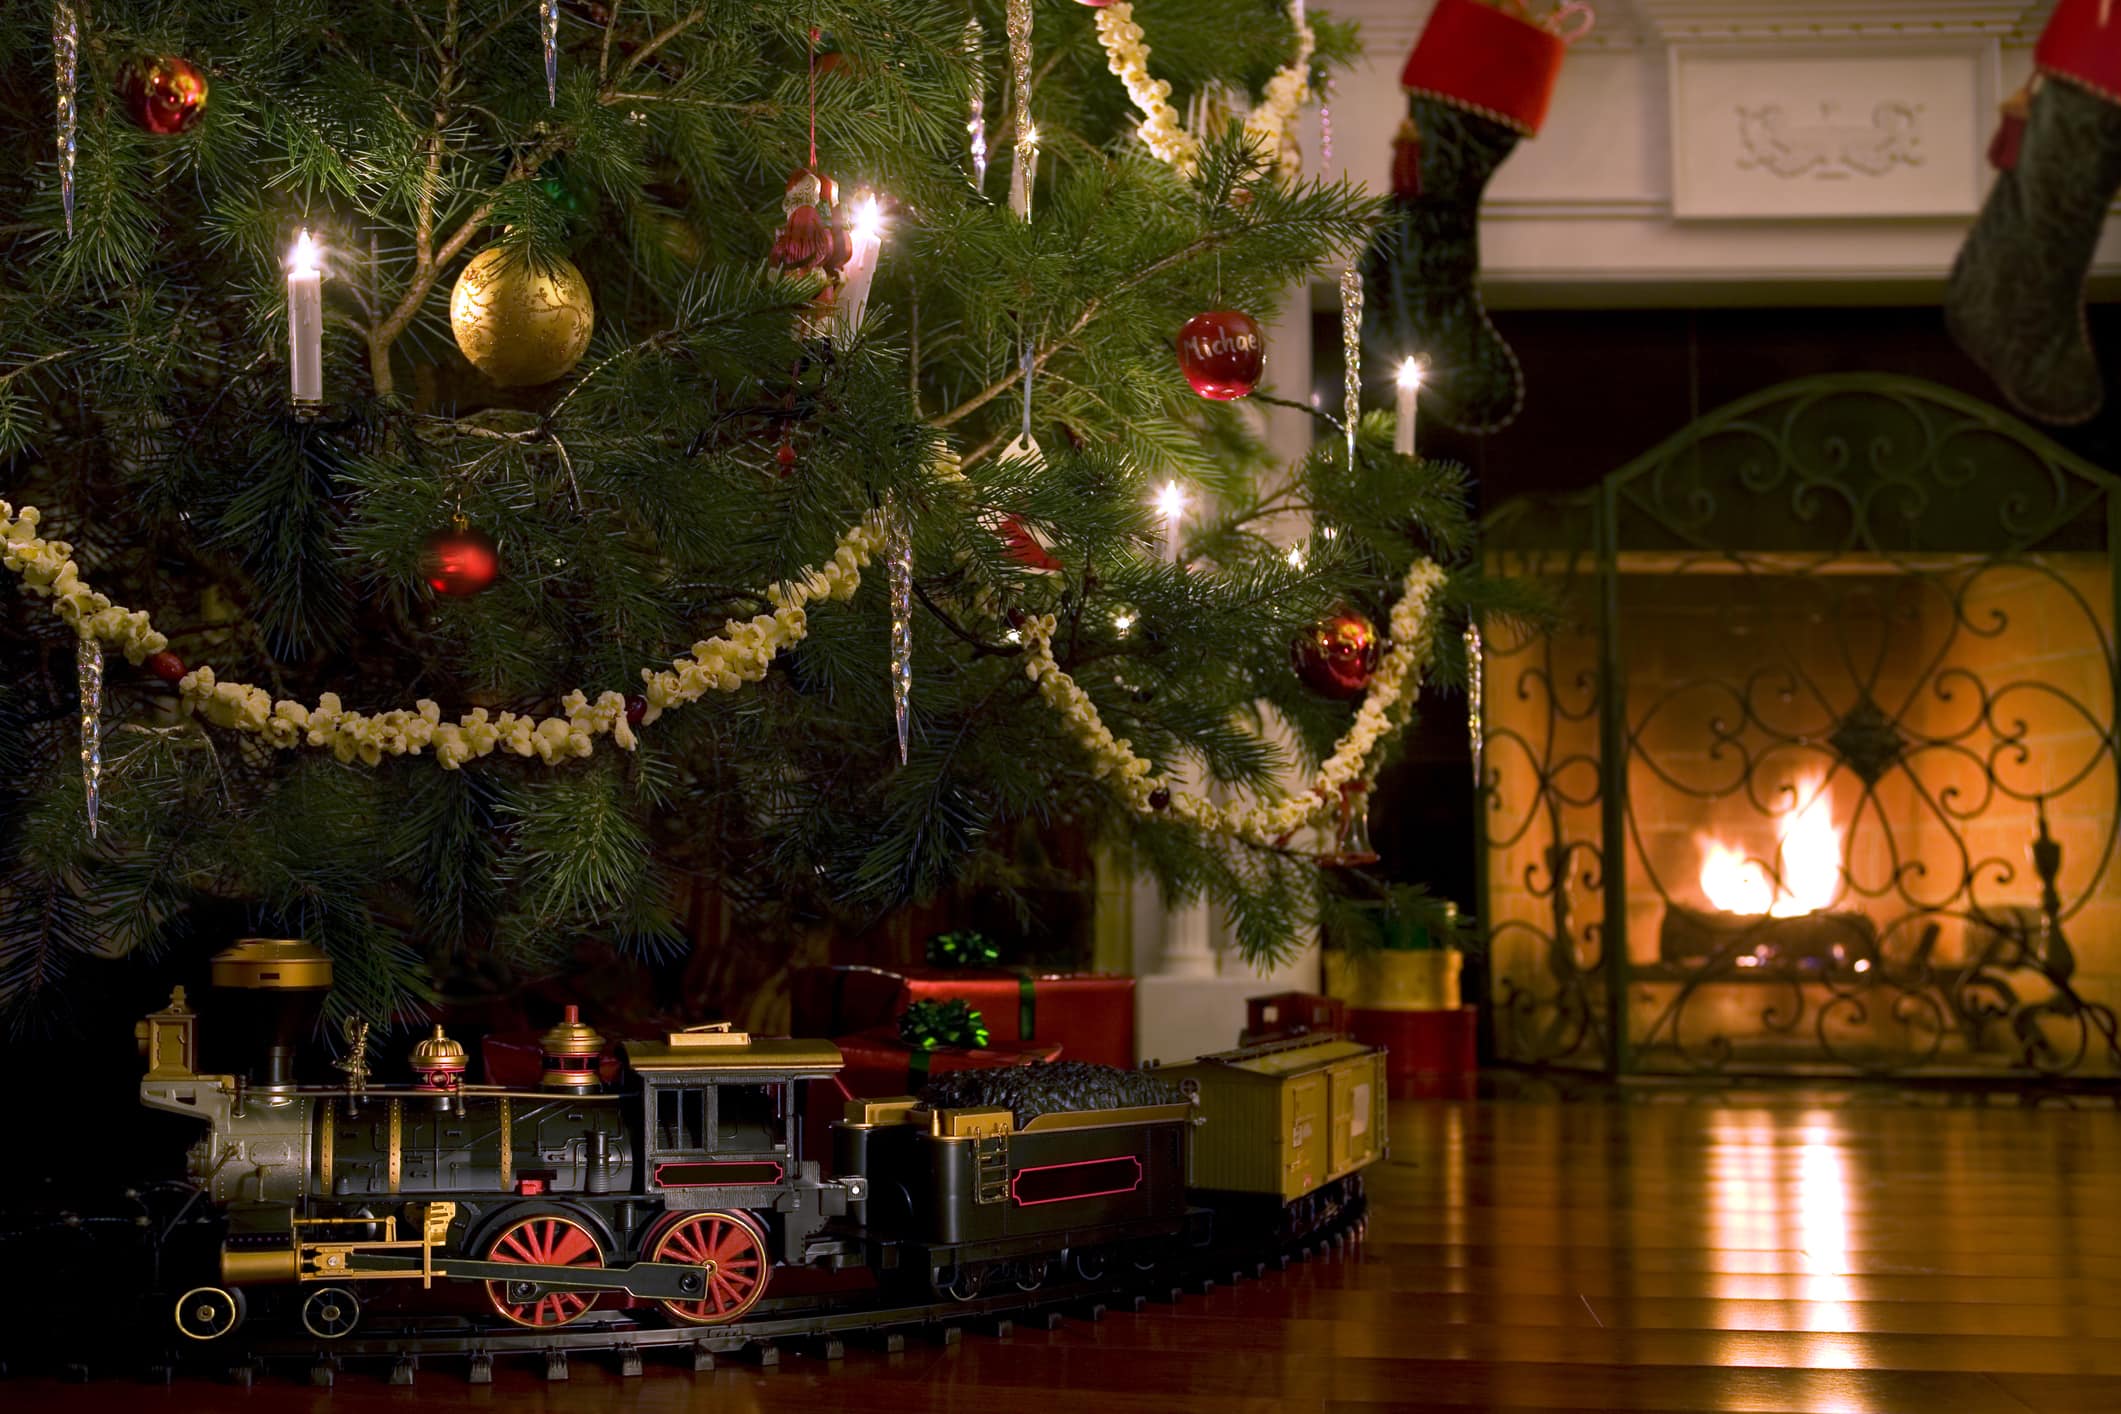 A toy train under a Christmas tree.